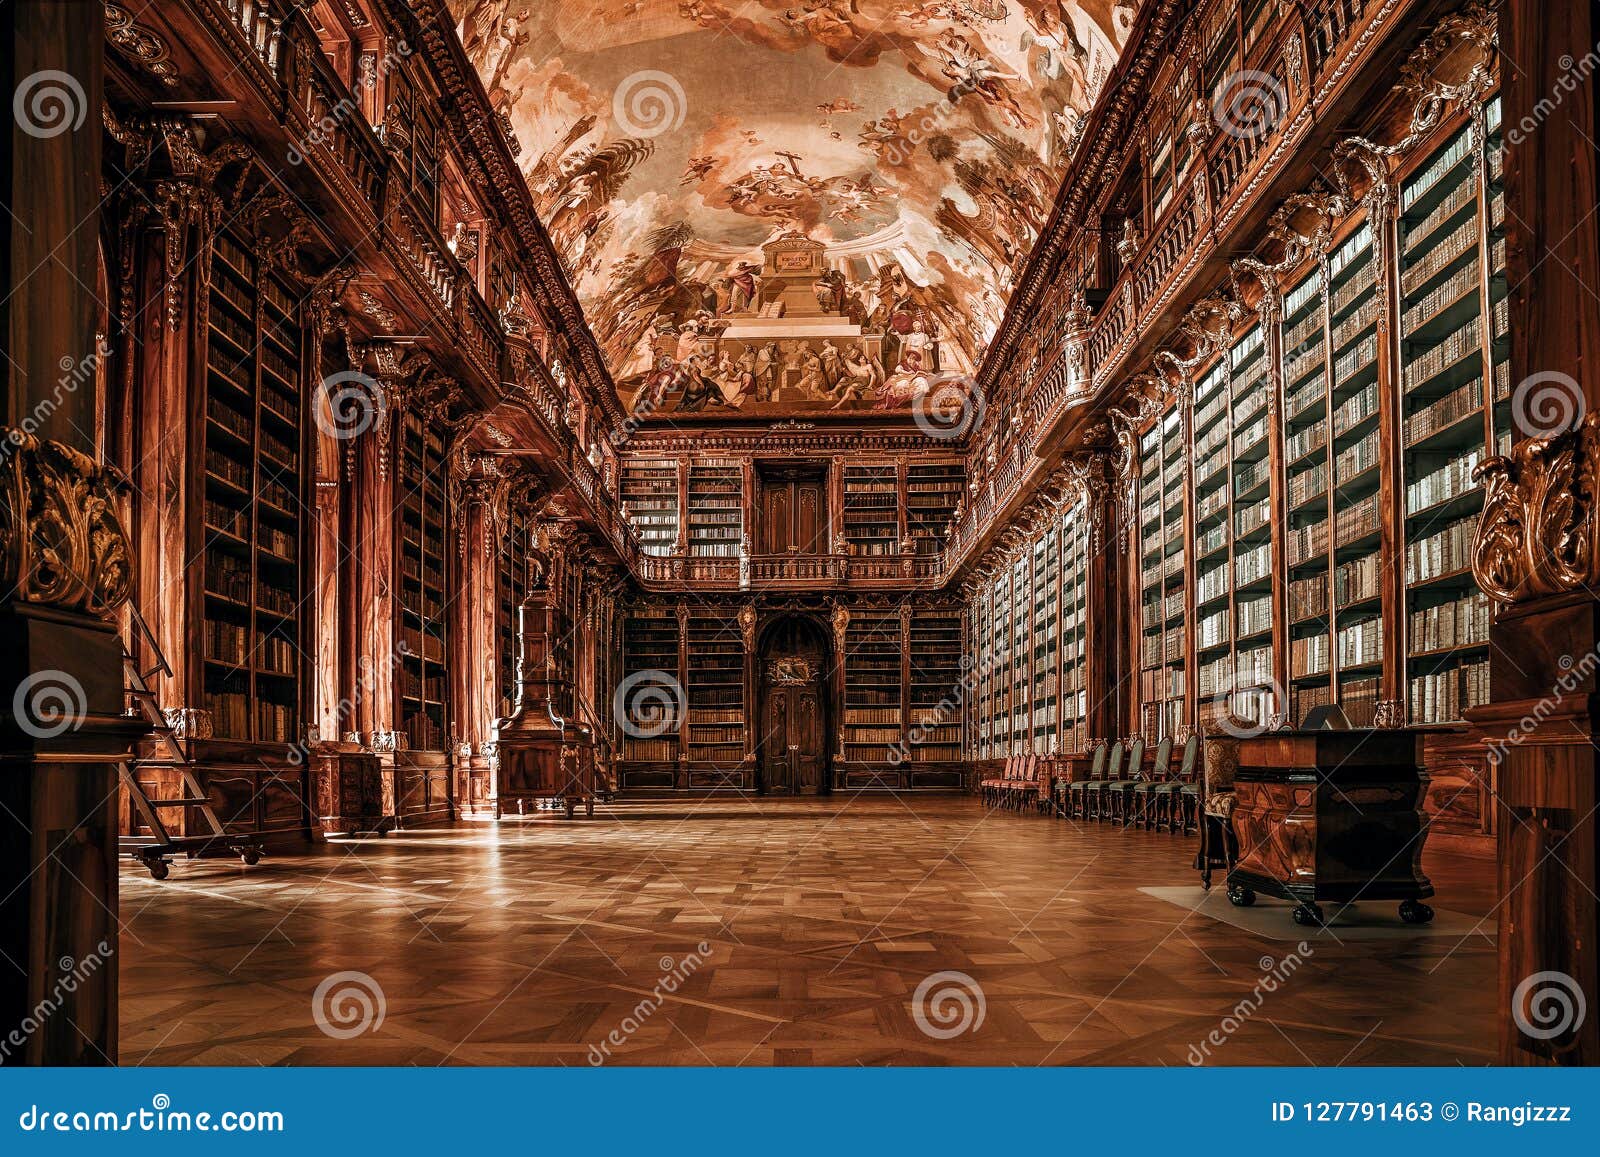 old, empty public library background